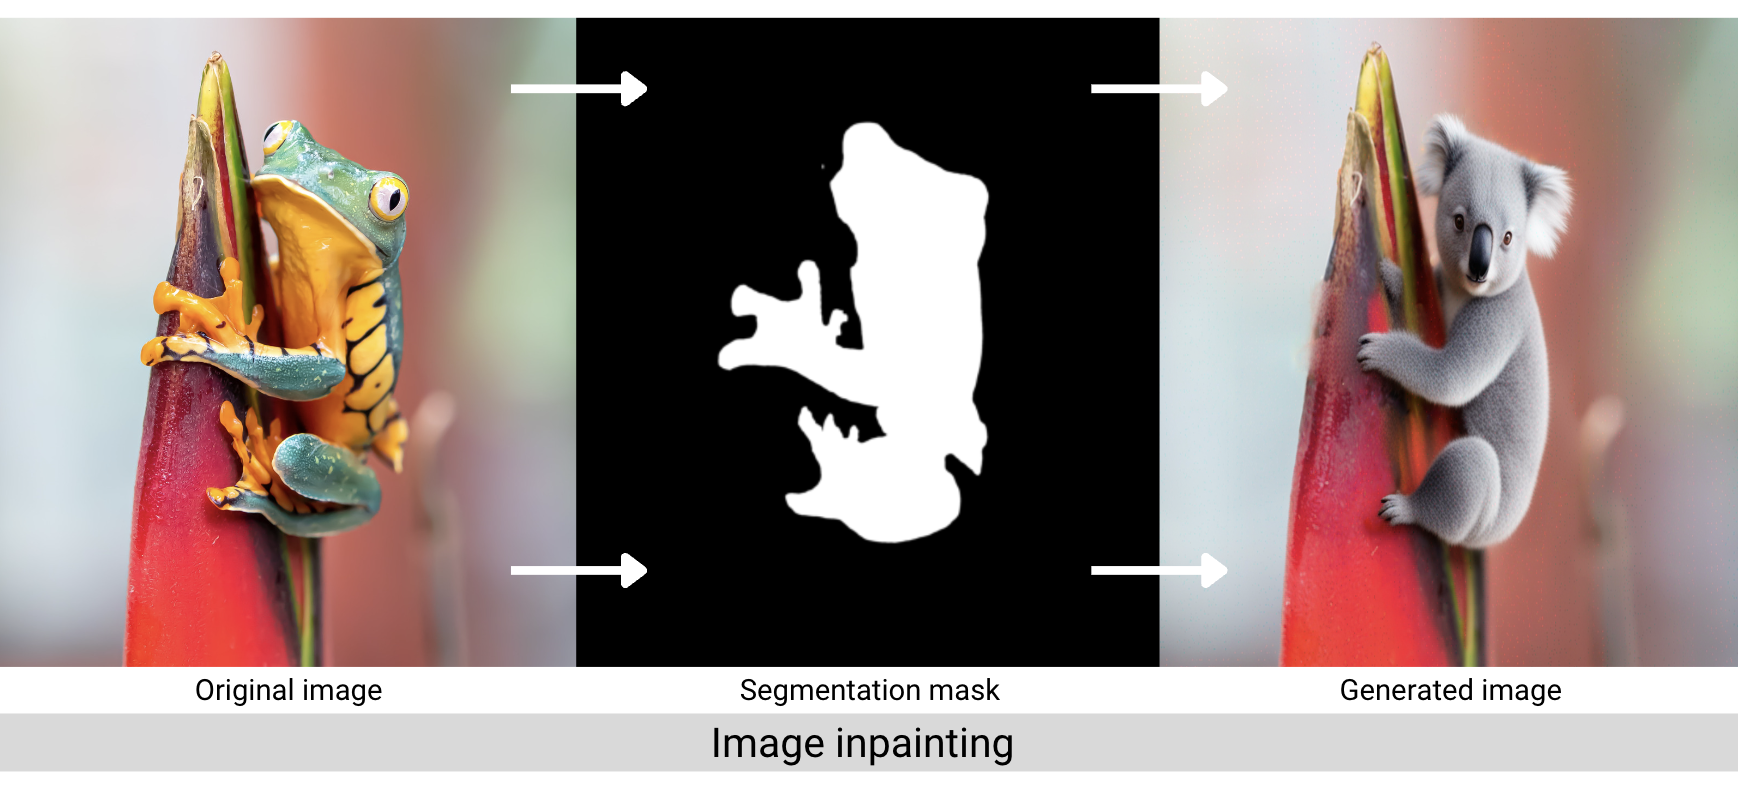 A graphic showing an original image, the segmentation mask of a frog, and the resulting inpatined image from the SDXL 1.0 diffusion pipeline.